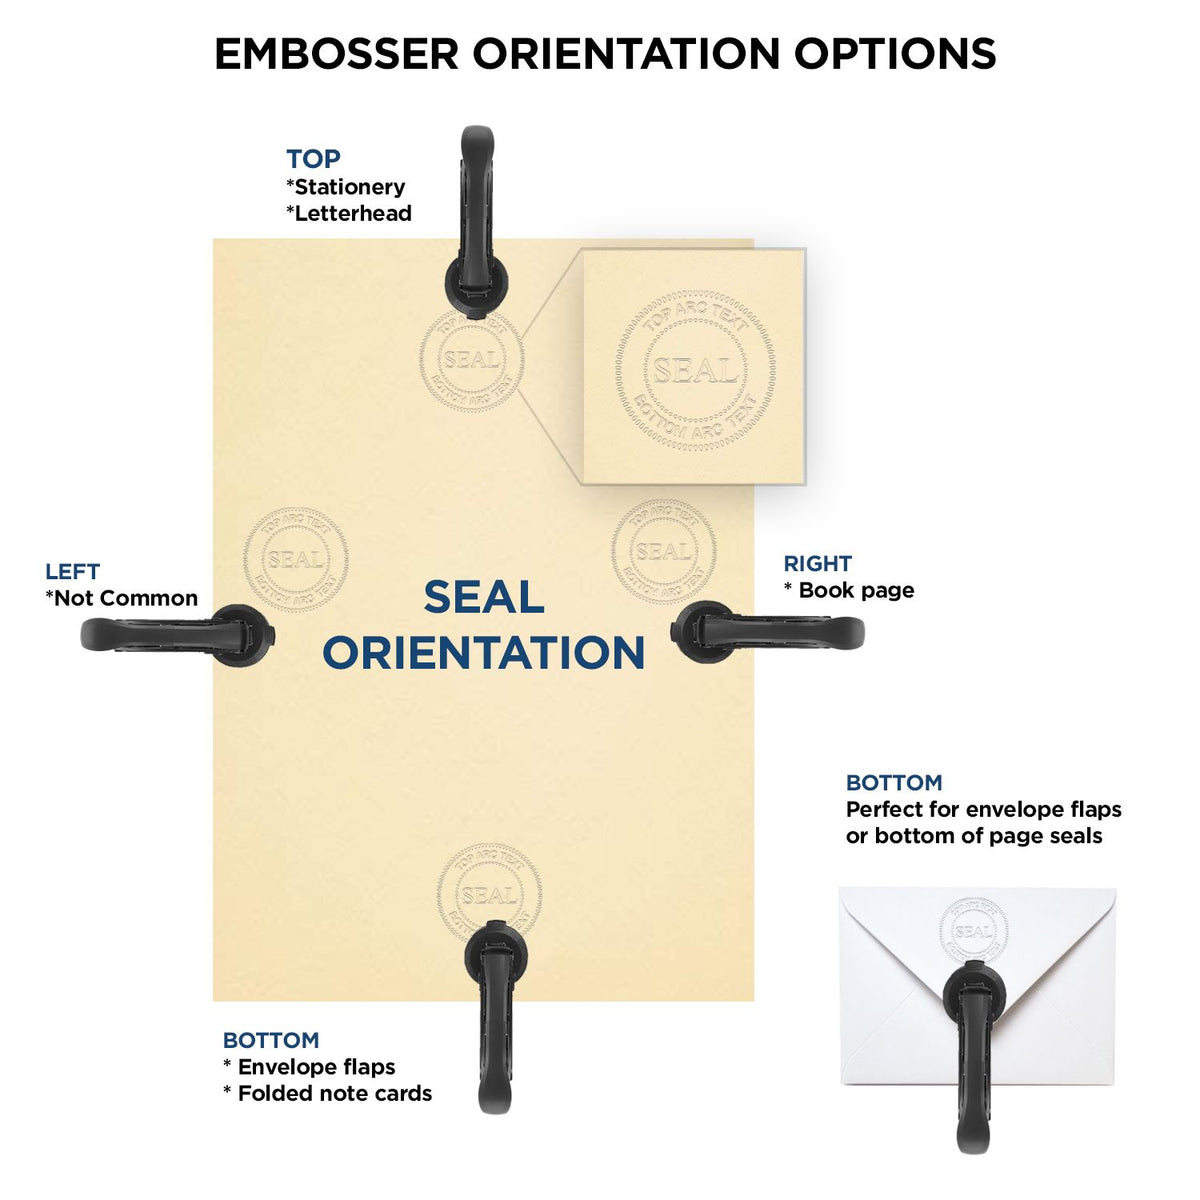 An infographic for the State of Arizona Long Reach Architectural Embossing Seal showing embosser orientation, this is showing examples of a top, bottom, right and left insert.